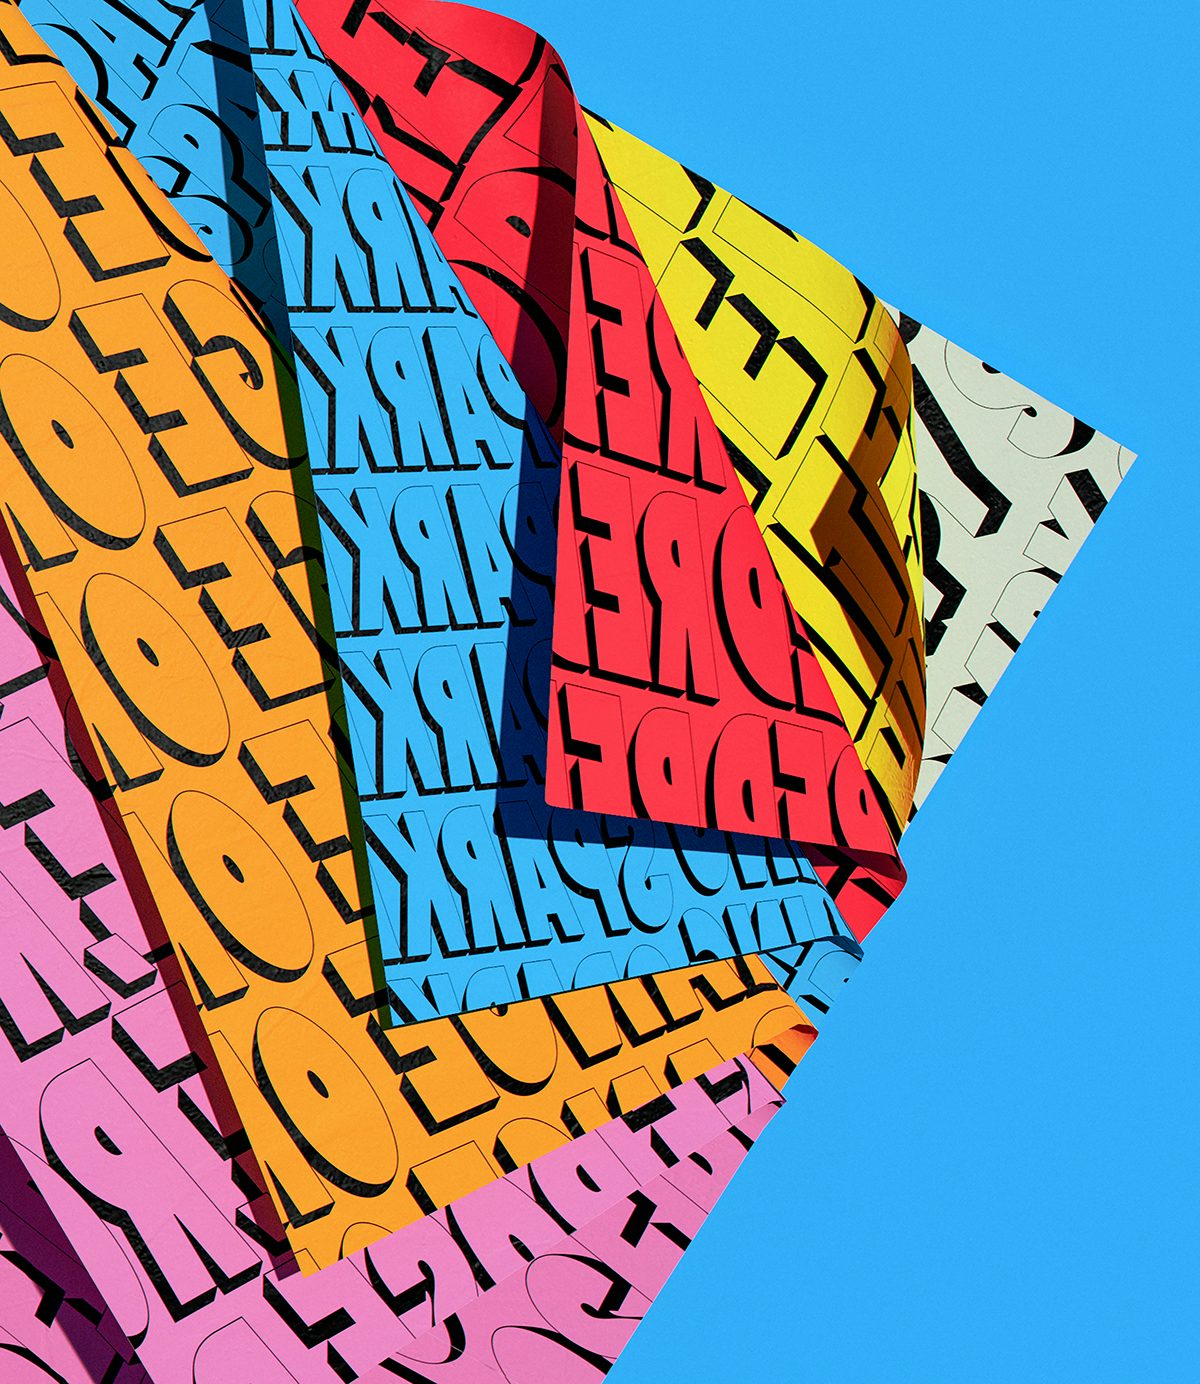 Image of Stompy's colourful brand materials by &Walsh